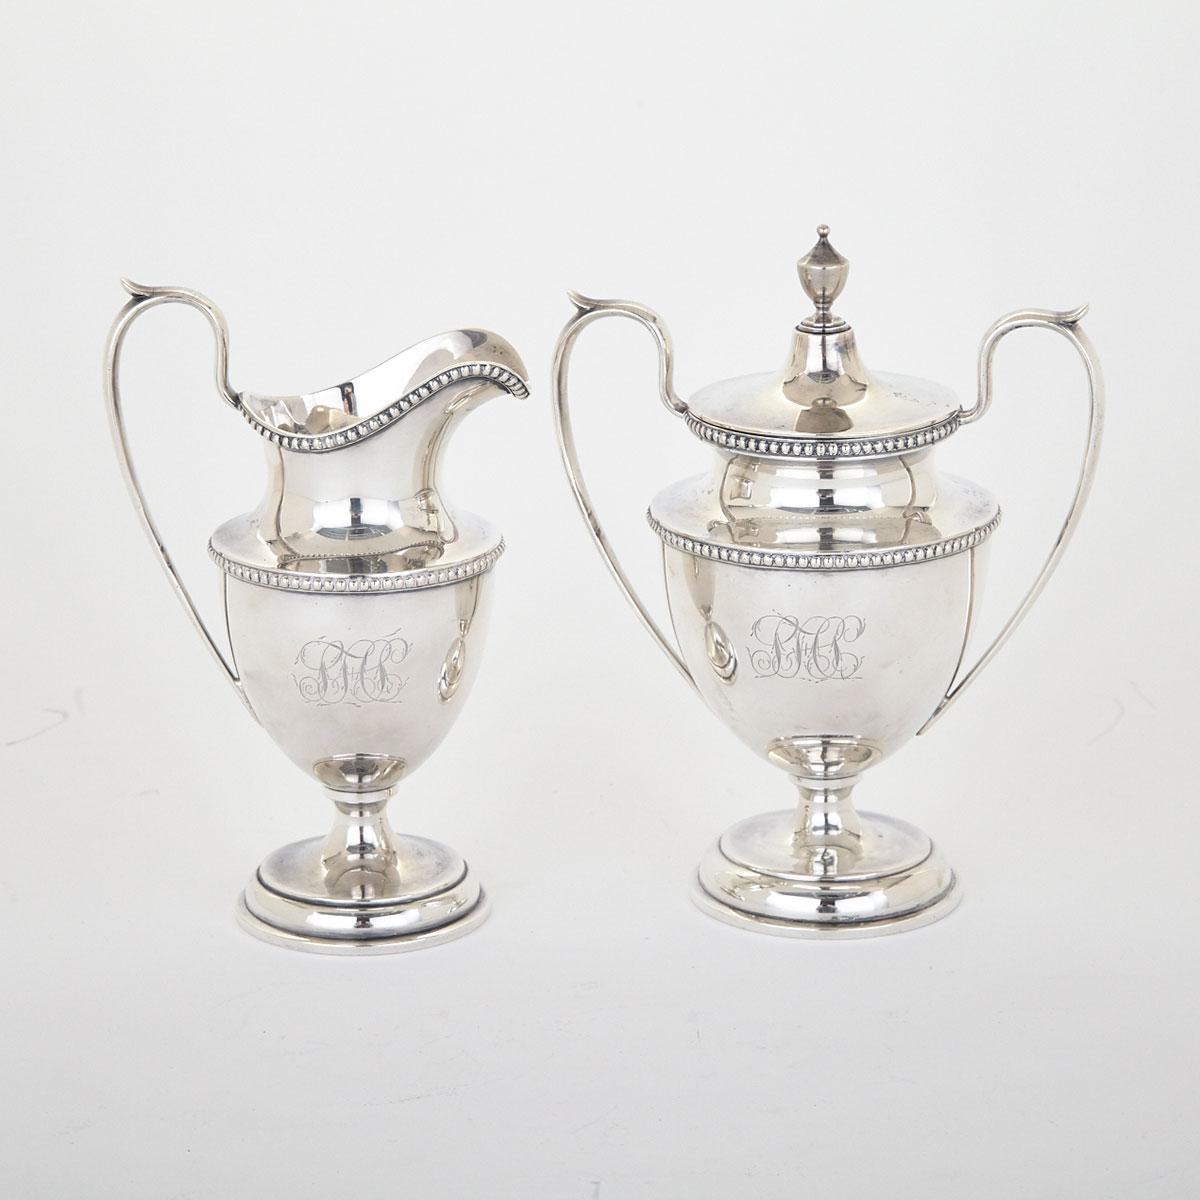 American Silver Cream Jug and Covered Sugar Basin, Samuel Kirk & Son Co., Baltimore, MD, early 20th century